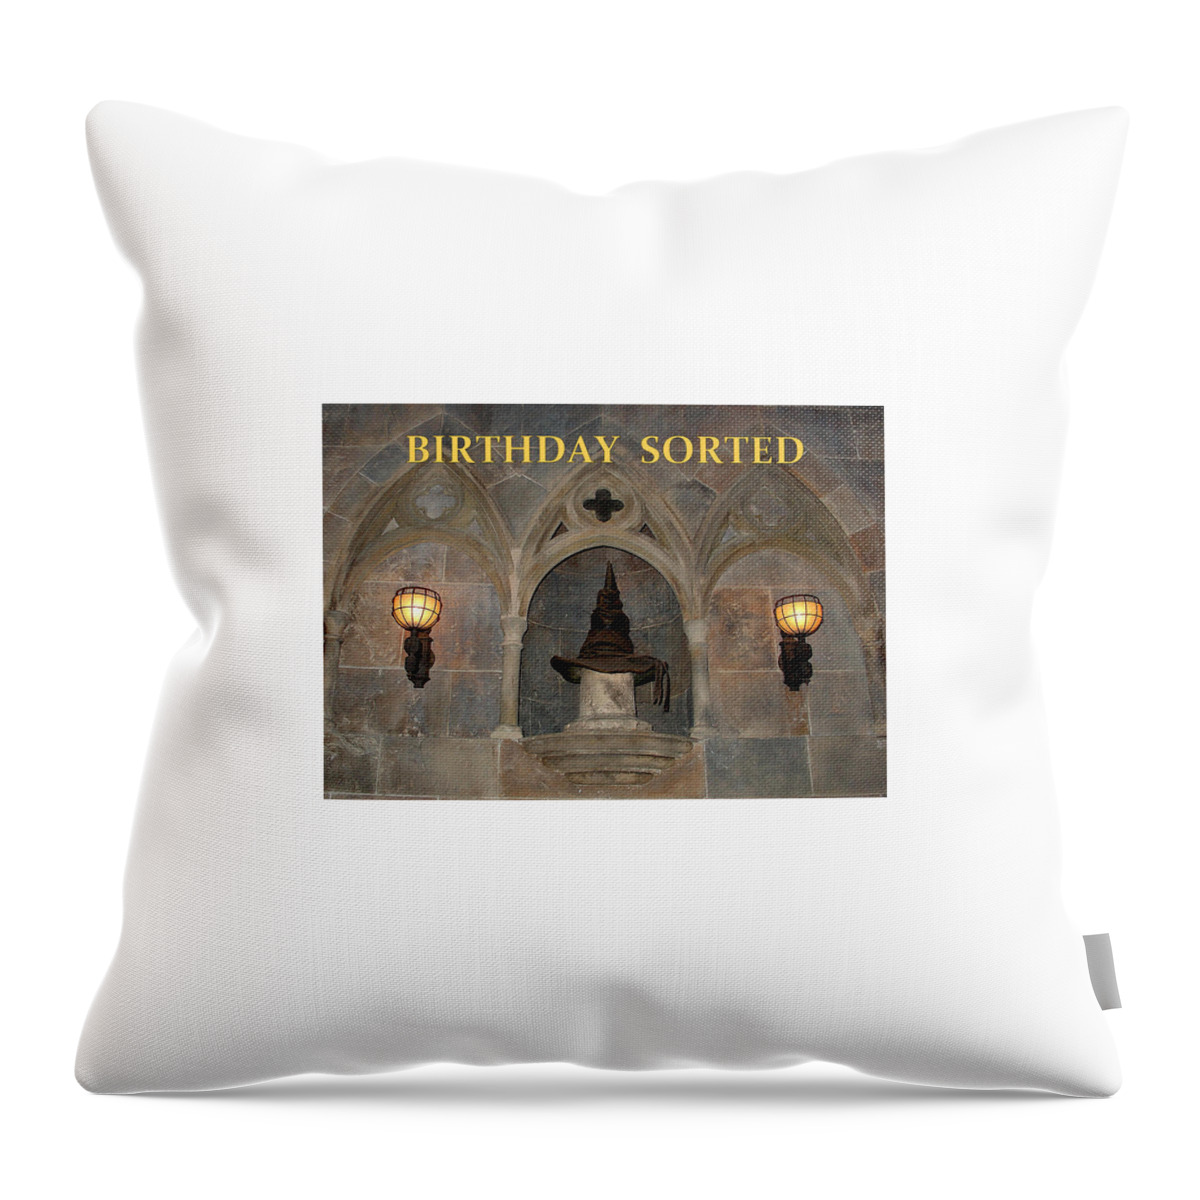 Usa Throw Pillow featuring the photograph Birthday Sorted by David Nicholls